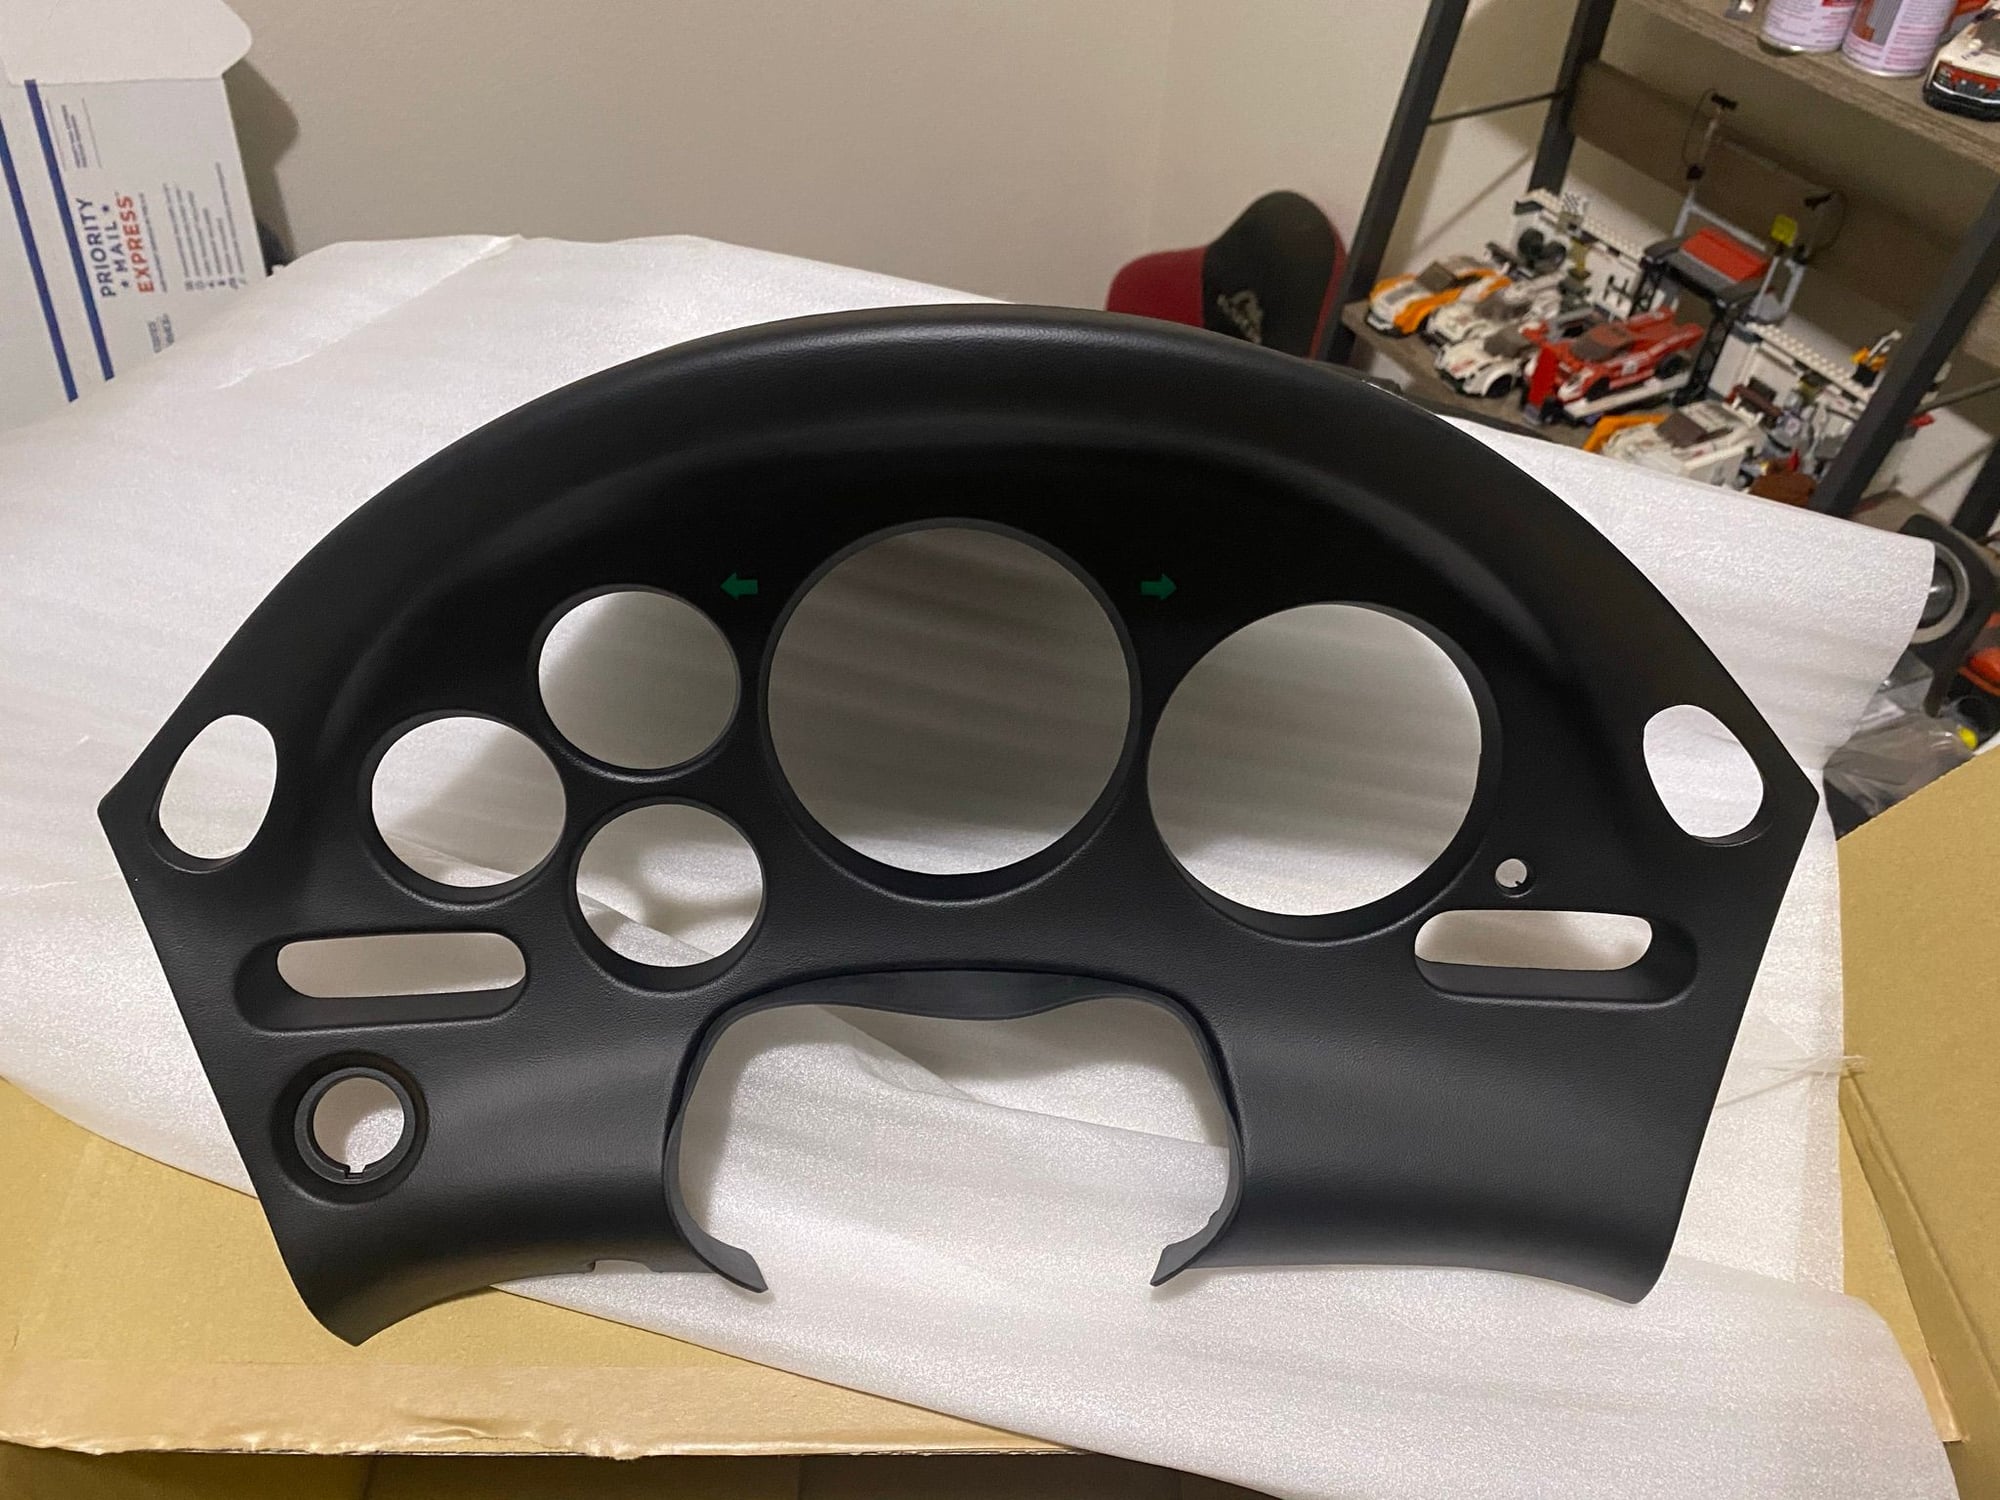 Interior/Upholstery - BNIB TEXTURED Meter Hood / Cluster Surround RHD FD - New - 1992 to 2002 Mazda RX-7 - Green Cove Springs, FL 32043, United States